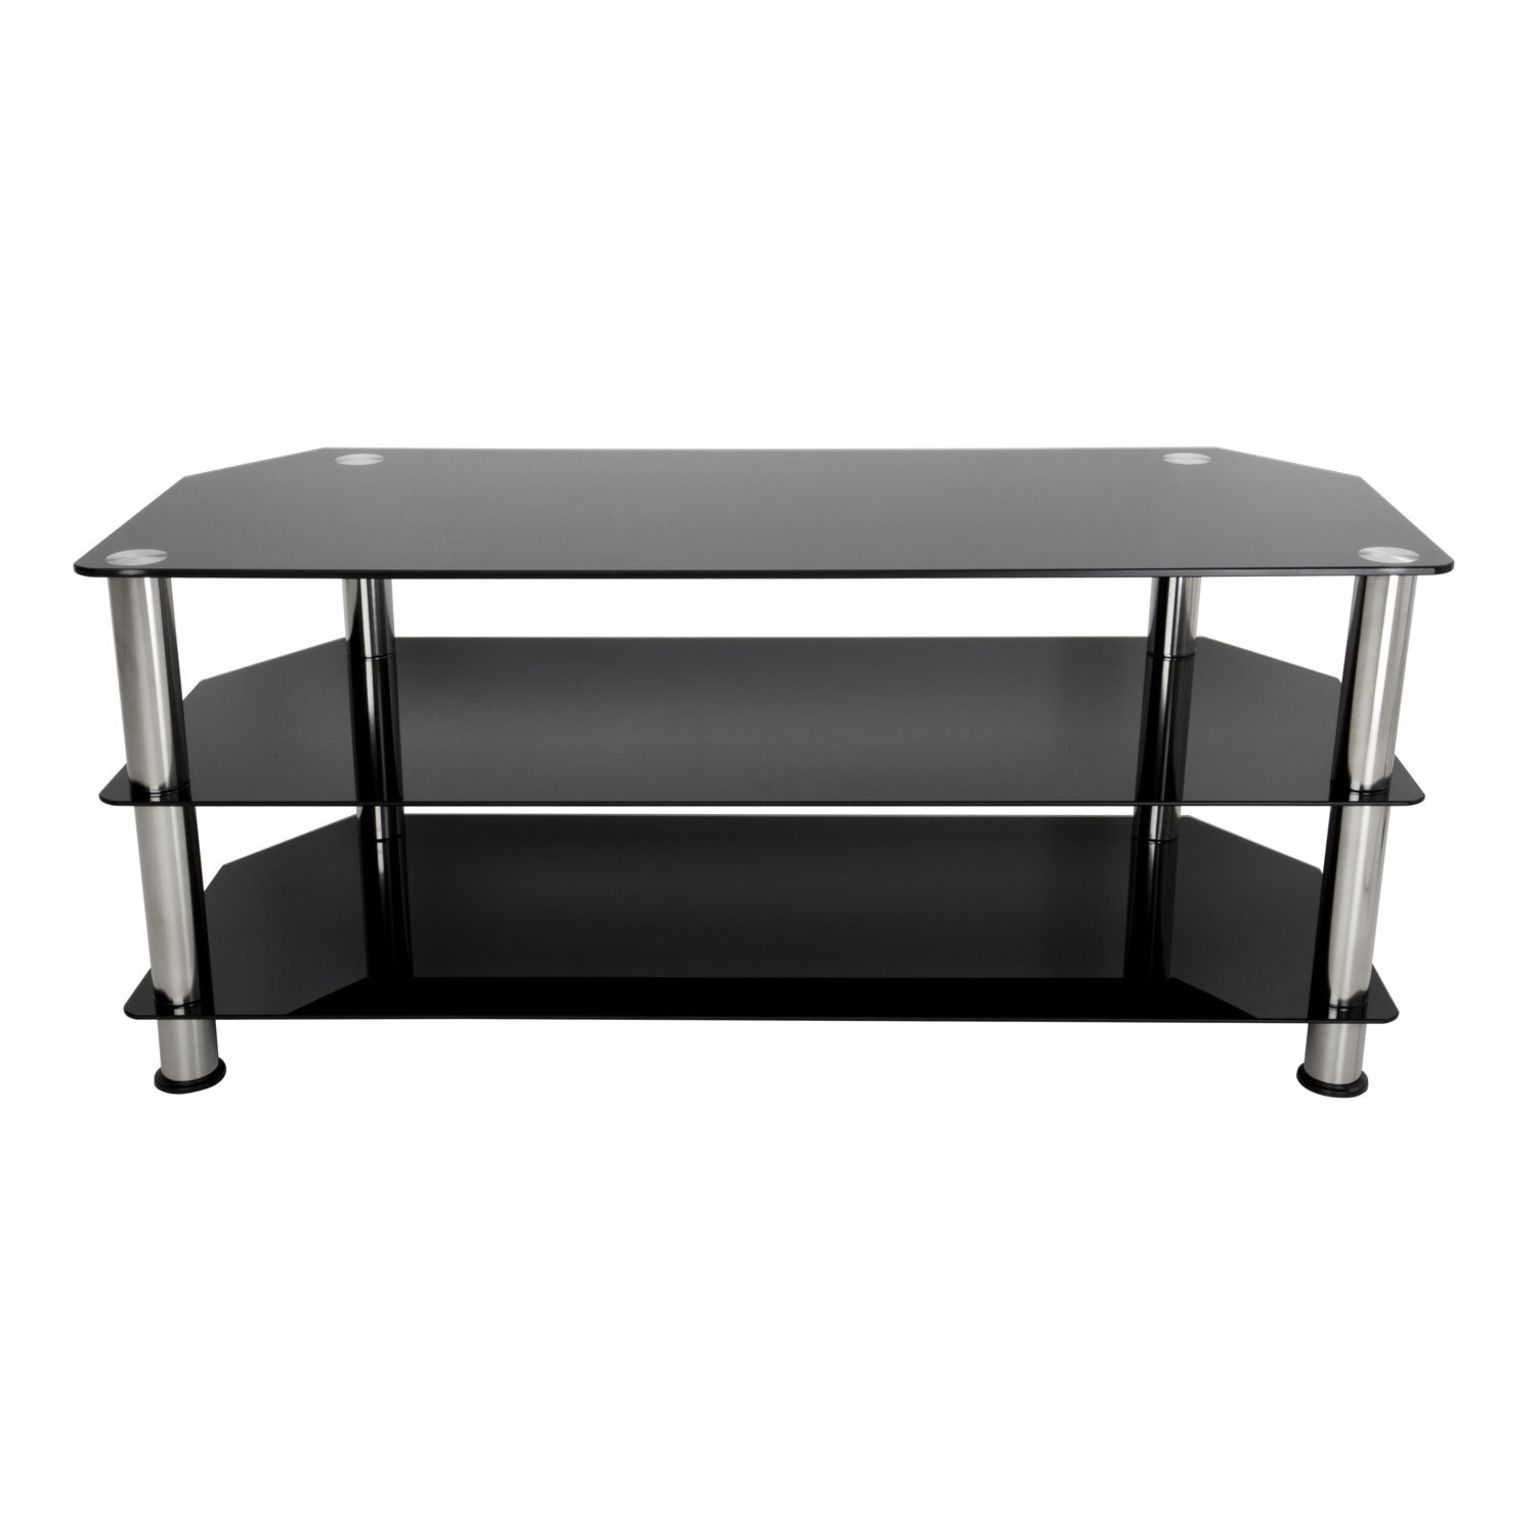 Https://en.shpock/i/w P0ut_e3qvdu2s8/ 2018 11 08t17:03:11+ For Kilian Black 60 Inch Tv Stands (Photo 9 of 30)